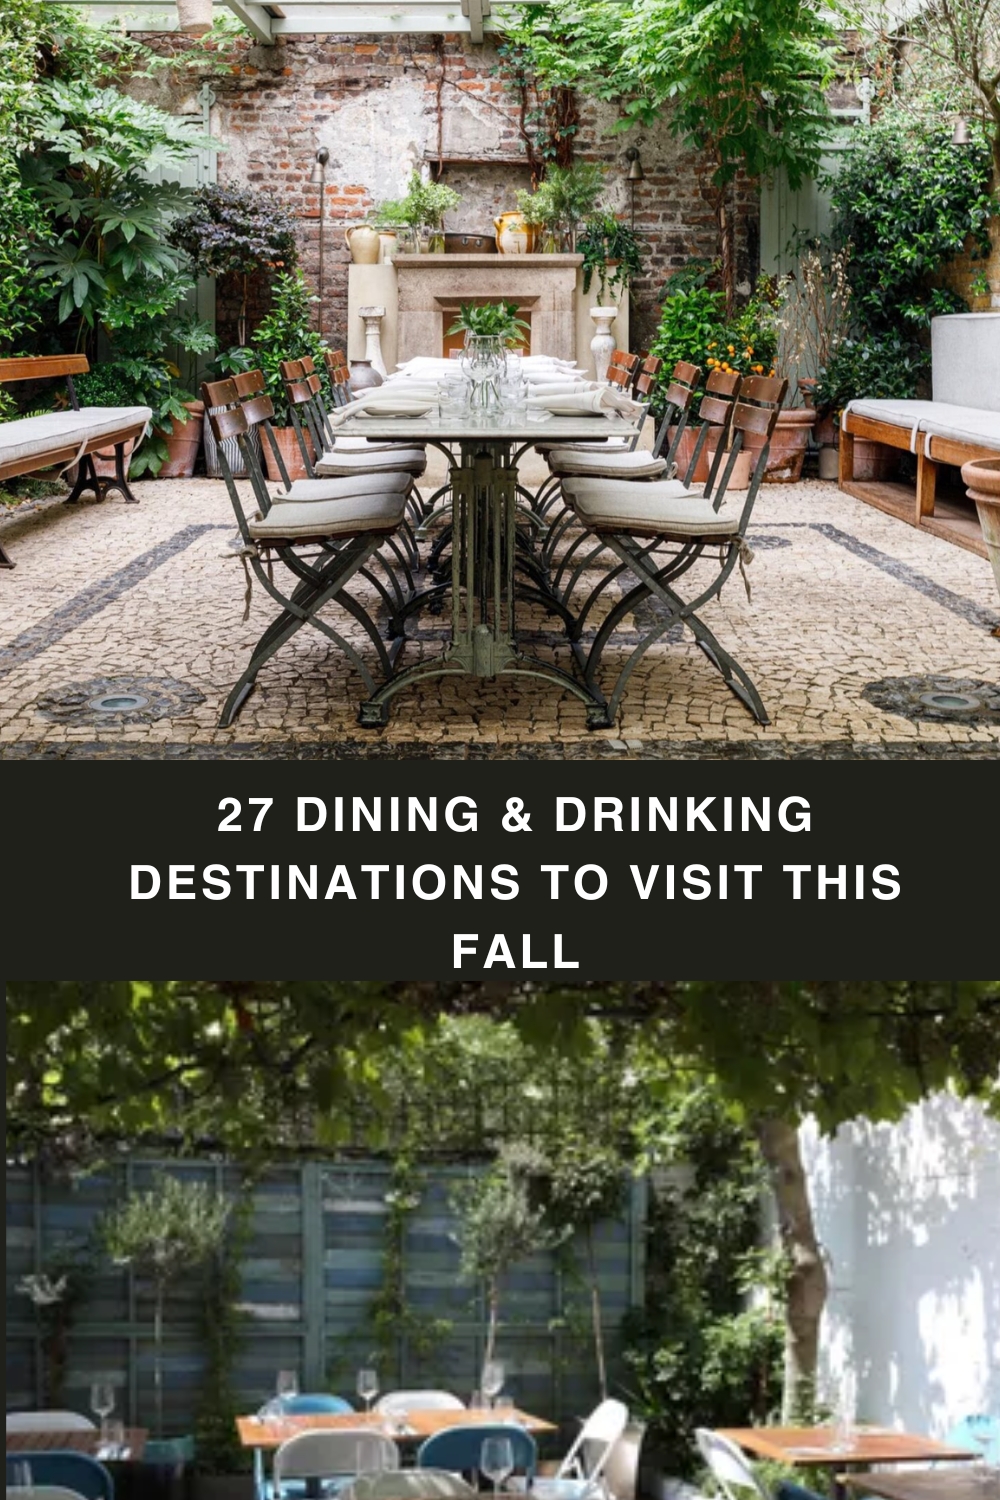 27 Dining & Drinking Destinations to Visit this Fall
